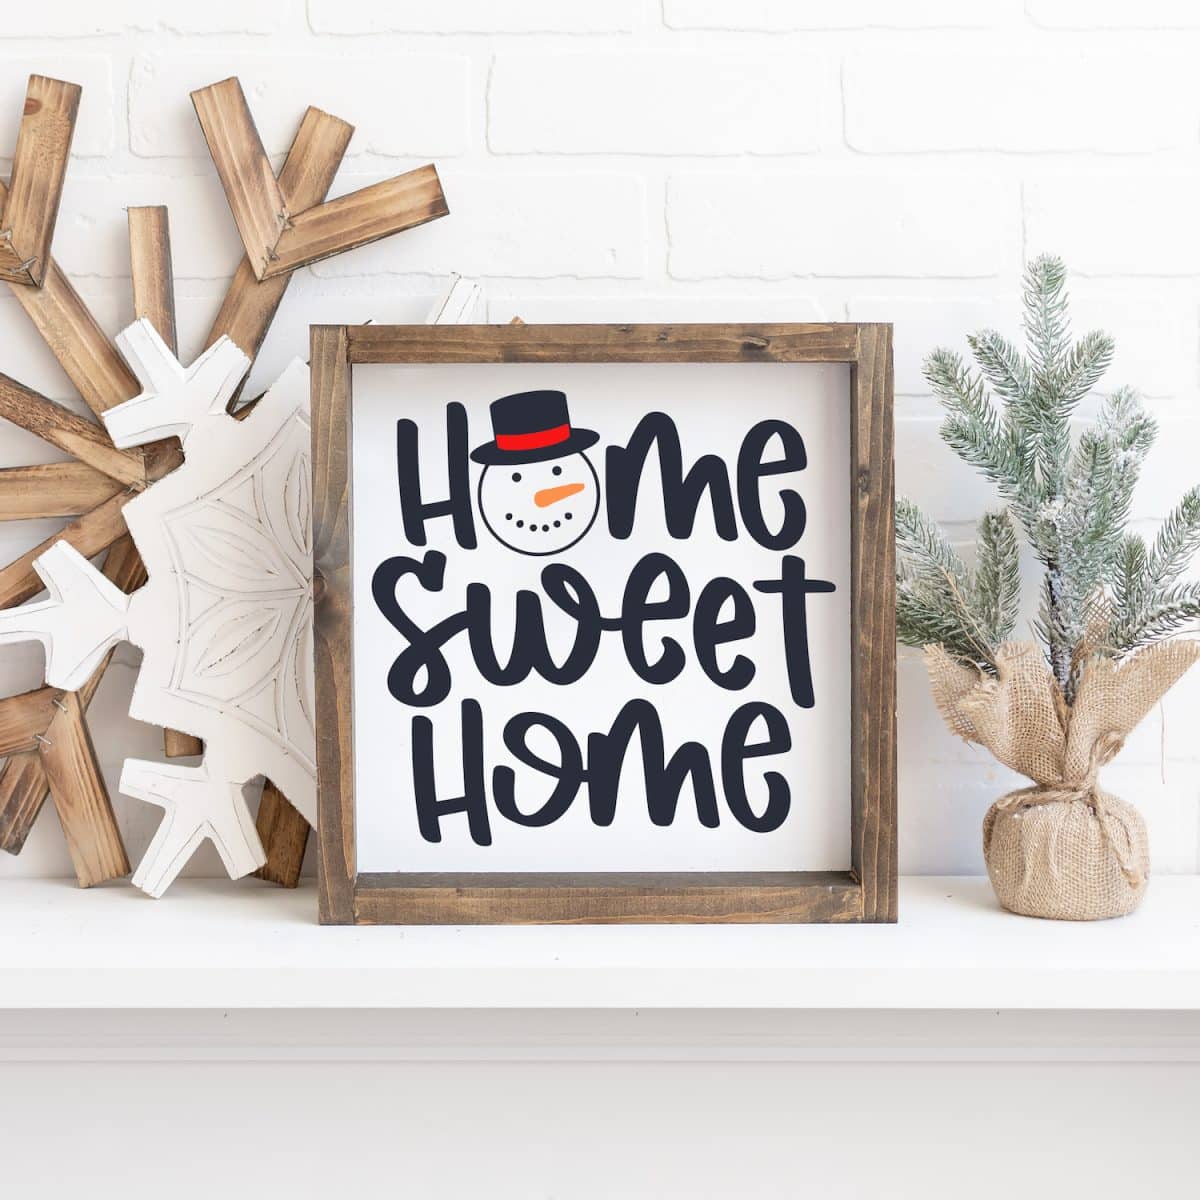 Snowman SVG Collection - Home Sweet Home Snowman SVG Cut File